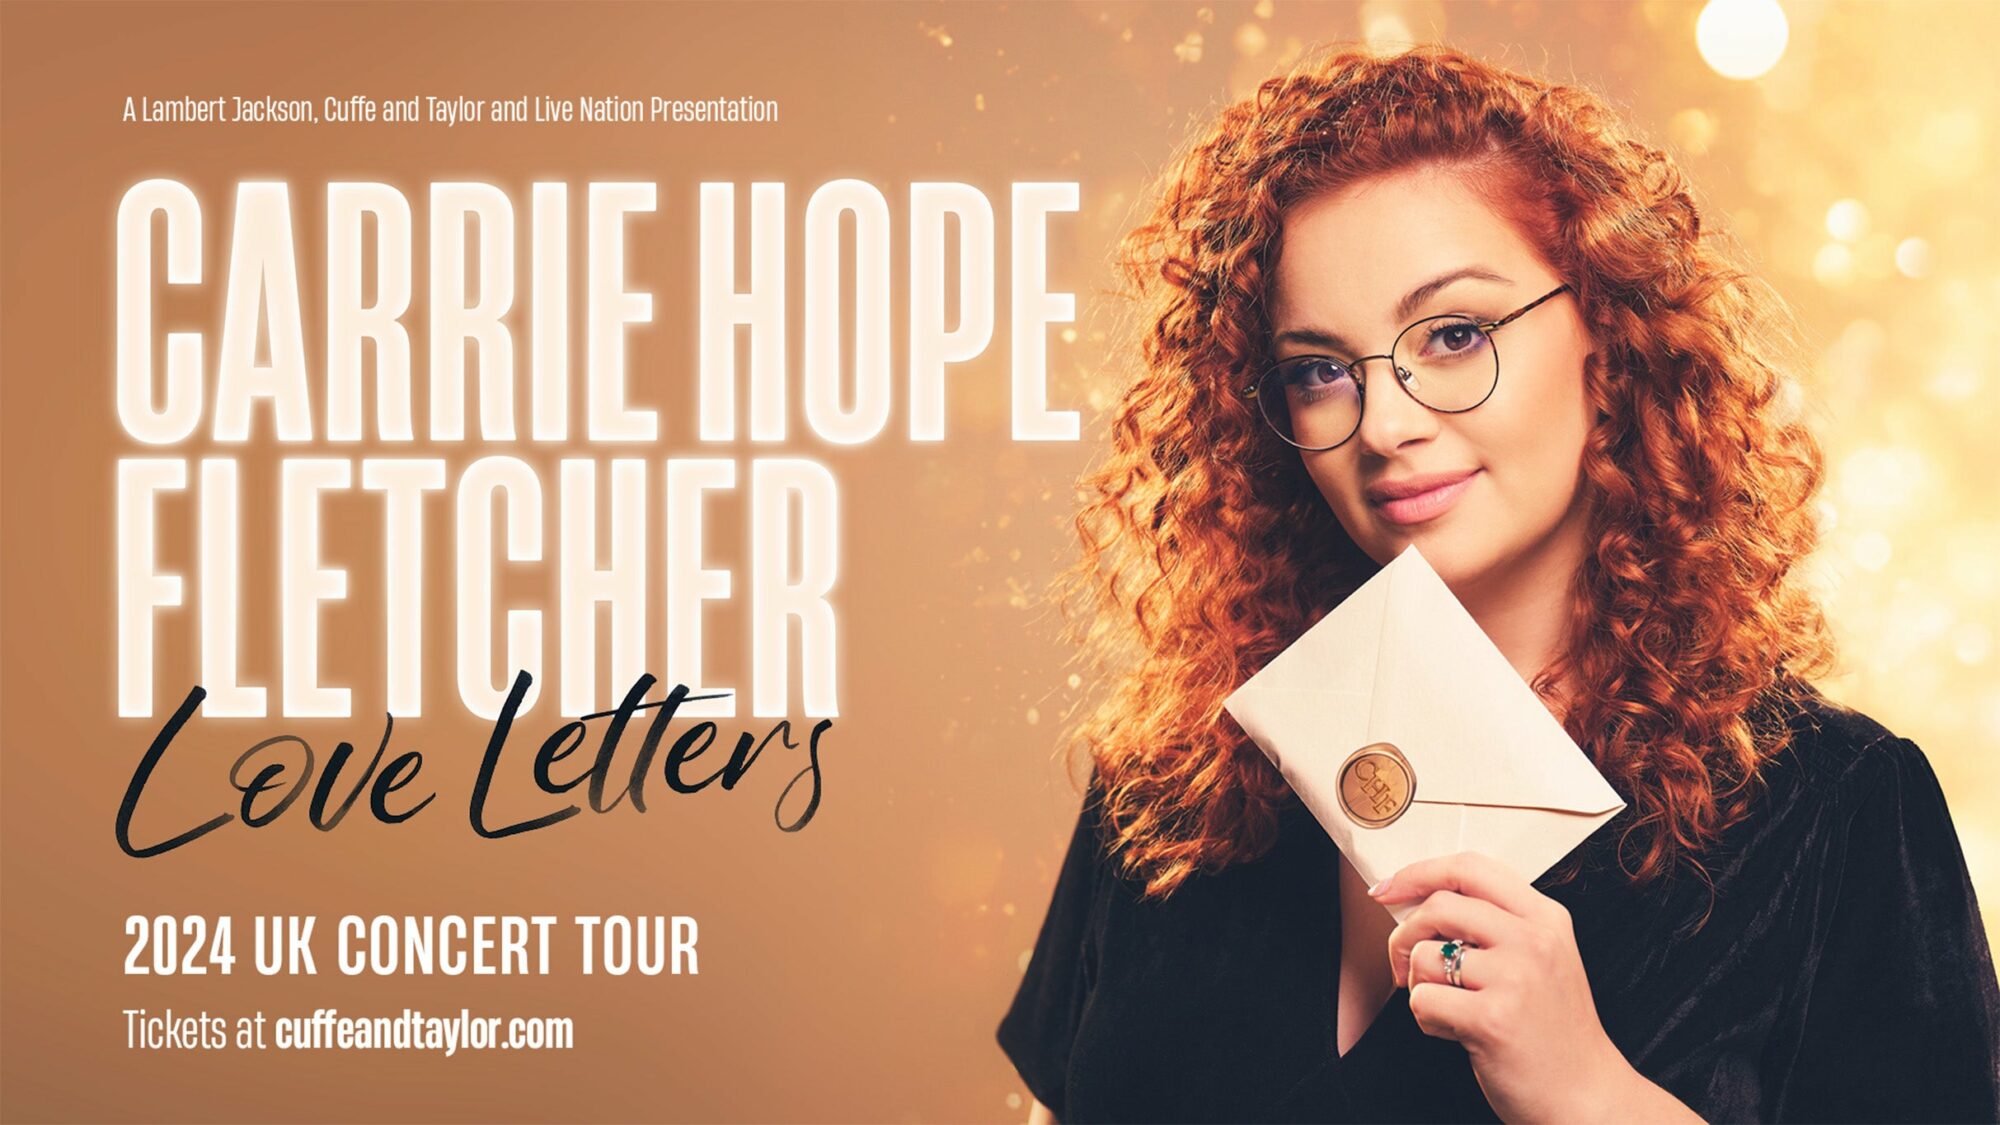 Image name Carrie Hope Fletcher Love Letters at York Barbican York the 5 image from the post Events in Yorkshire.com.